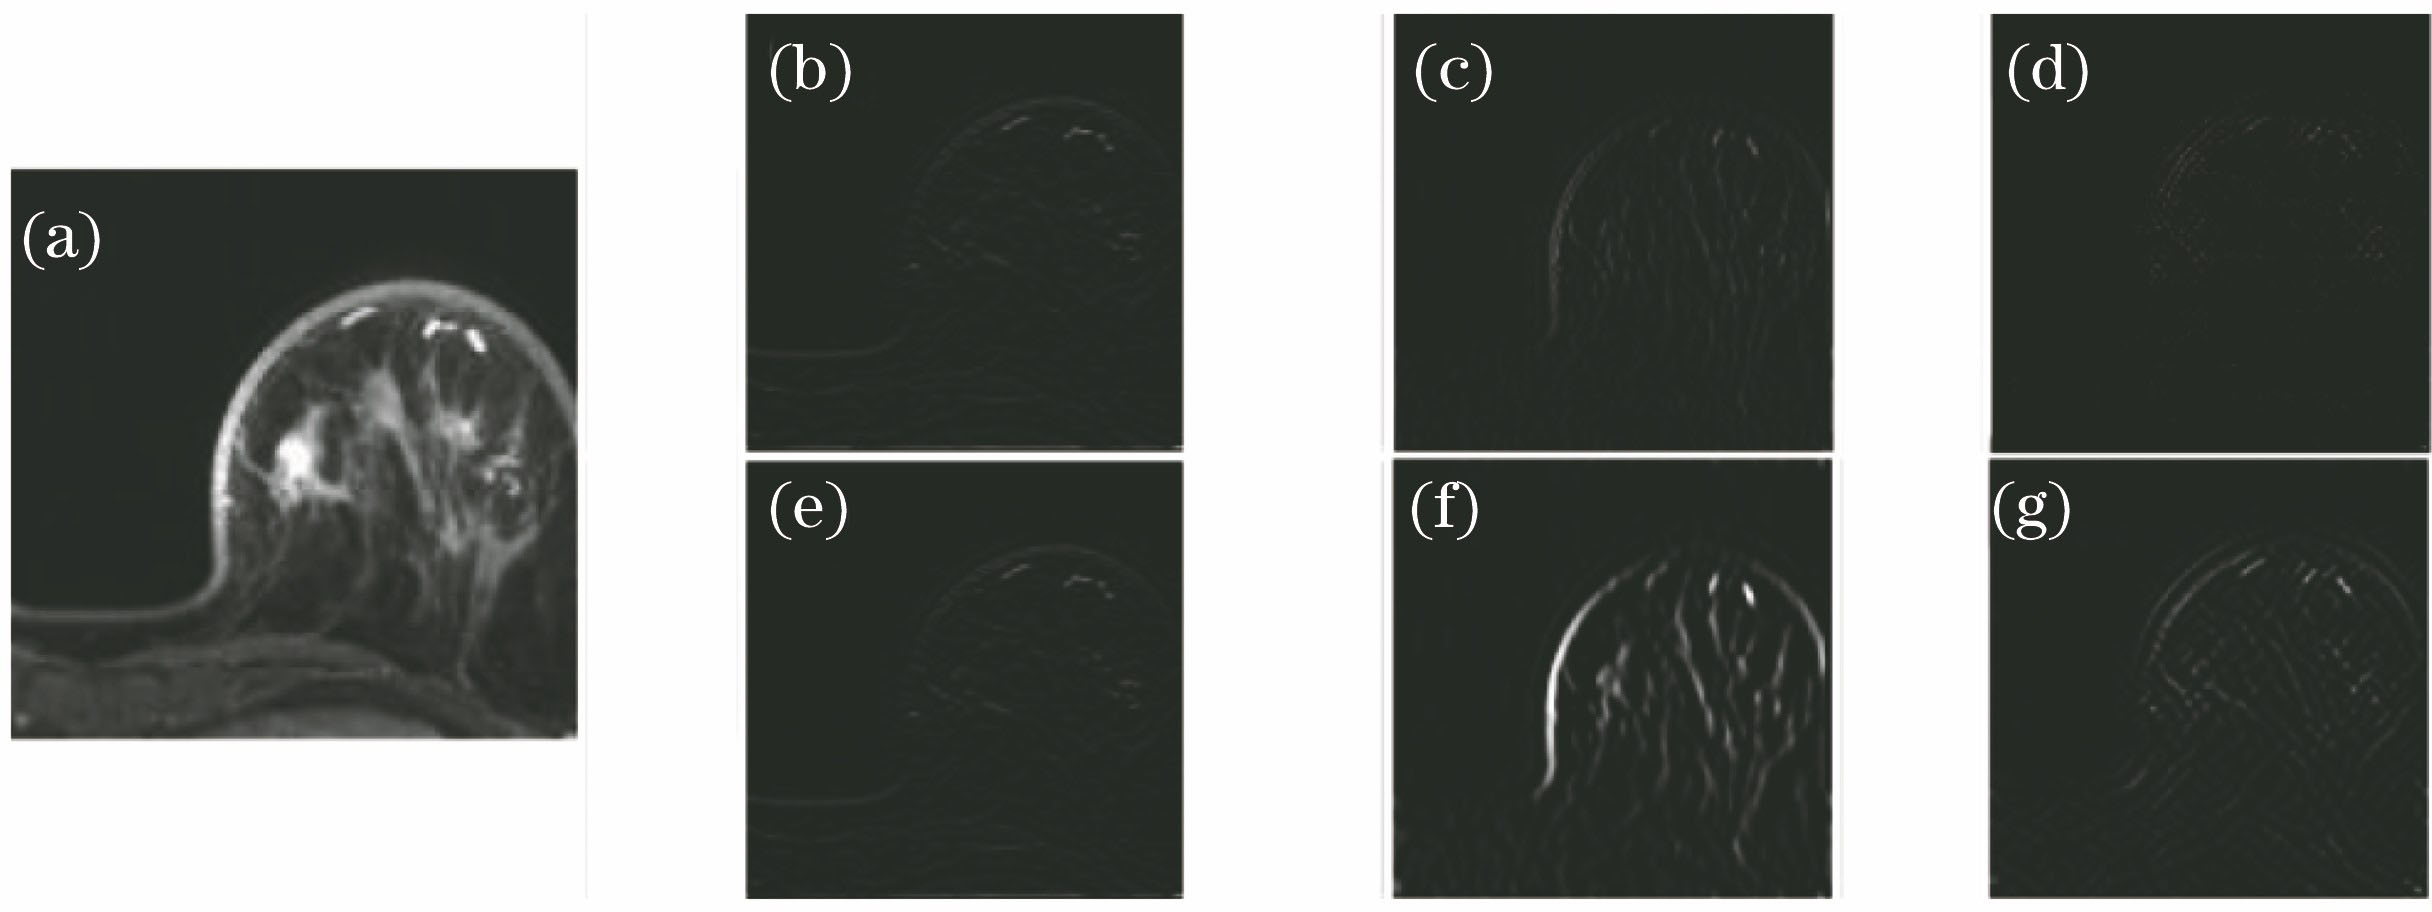 An example of stationary wavelet transform using db2 in internal dataset. (a) Original image; (b)-(d) horizontal, vertical, diagonal high frequency of 1-level SWT; (e)-(g) horizontal, vertical, diagonal high frequency of 2-level SWT